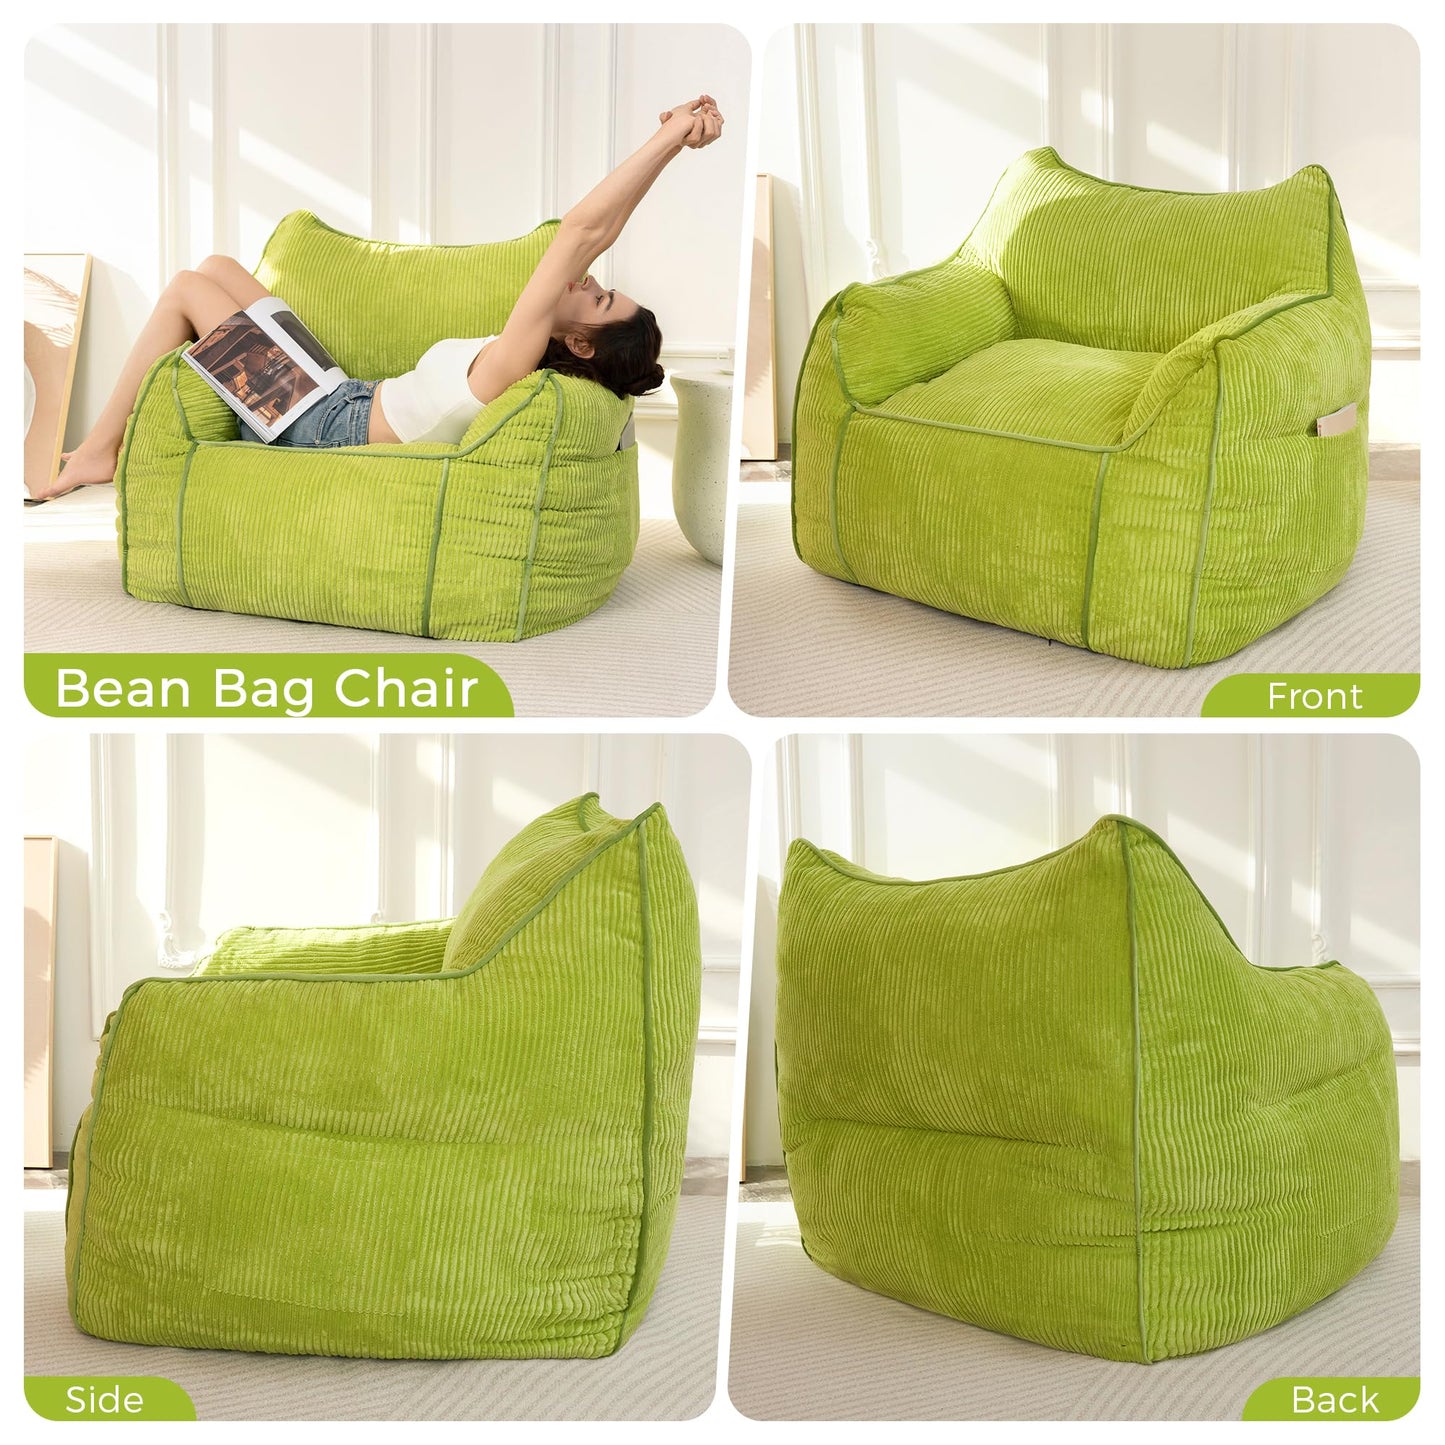 MAXYOYO Giant Bean Bag Sofa for Adults, Corduroy High-Density Foam Filled Bean Bag Chair, Large Lazy Puff Chair for Living Room, Bedroom (Green)